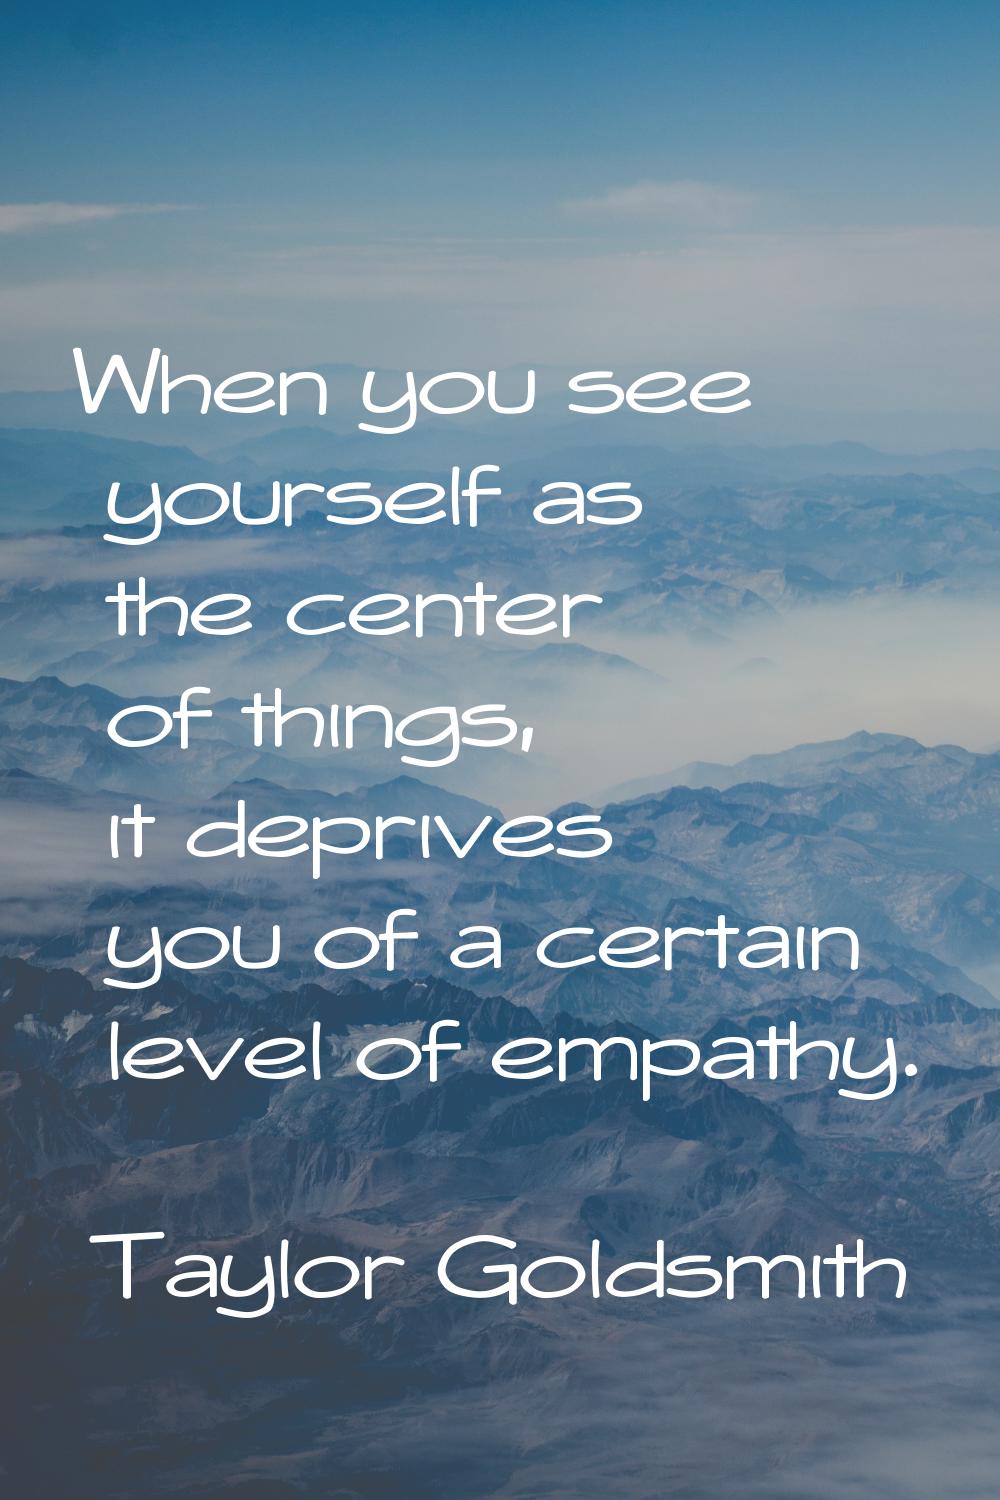 When you see yourself as the center of things, it deprives you of a certain level of empathy.